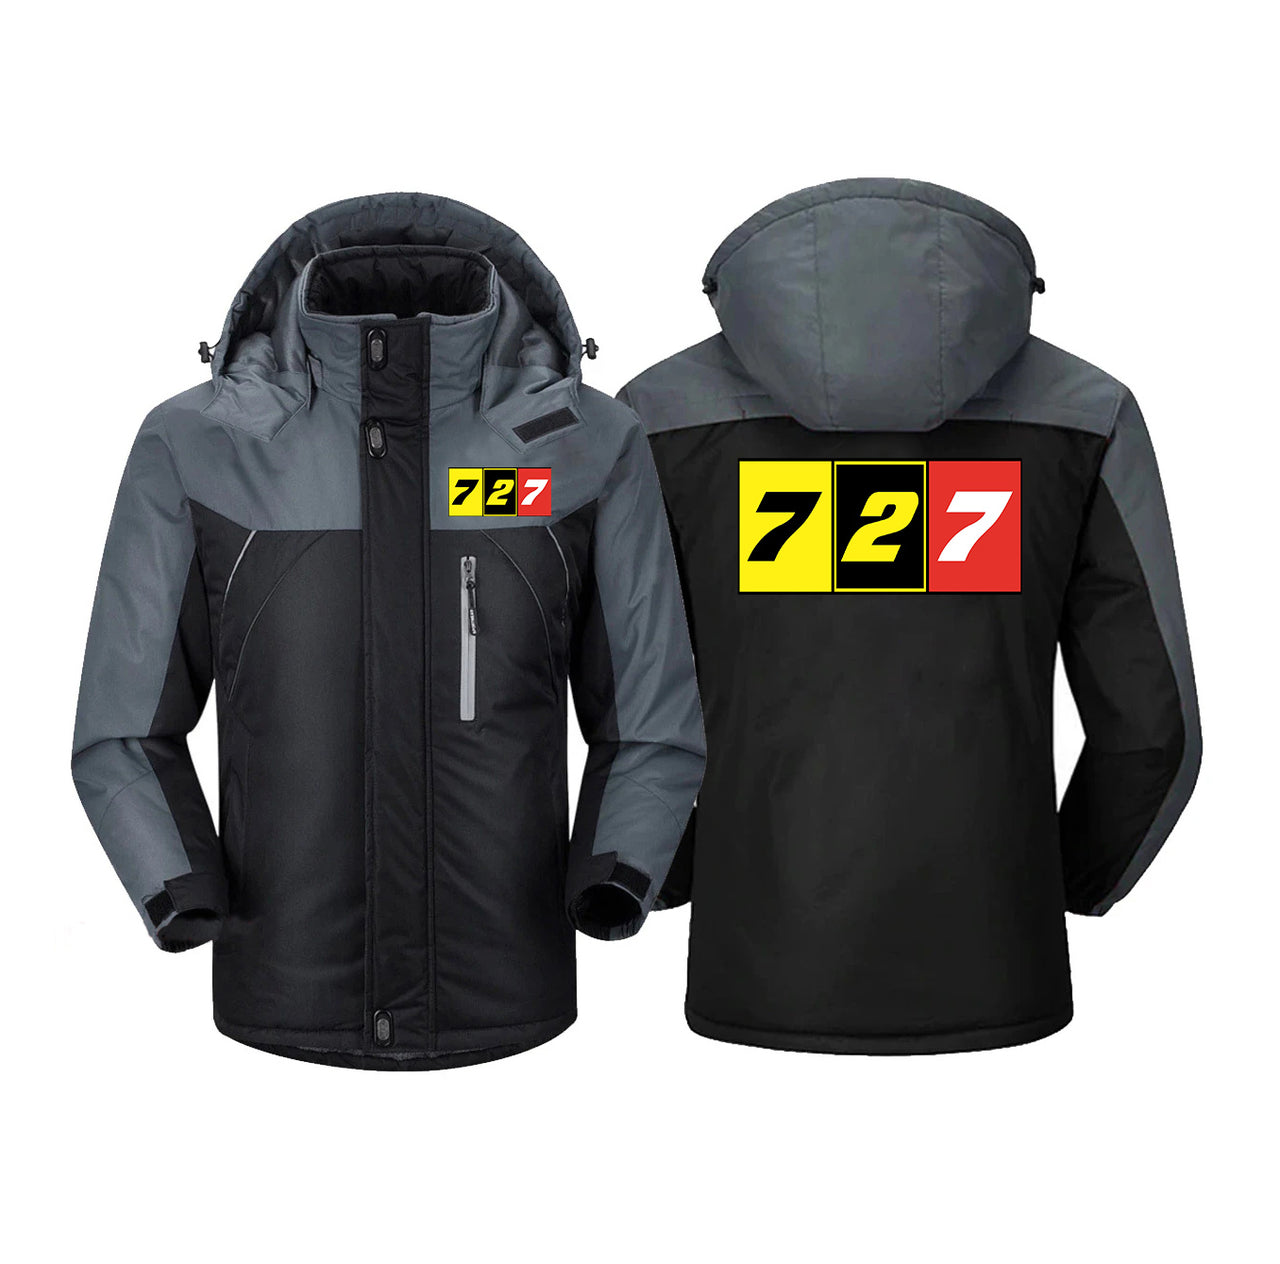 Flat Colourful 727 Designed Thick Winter Jackets